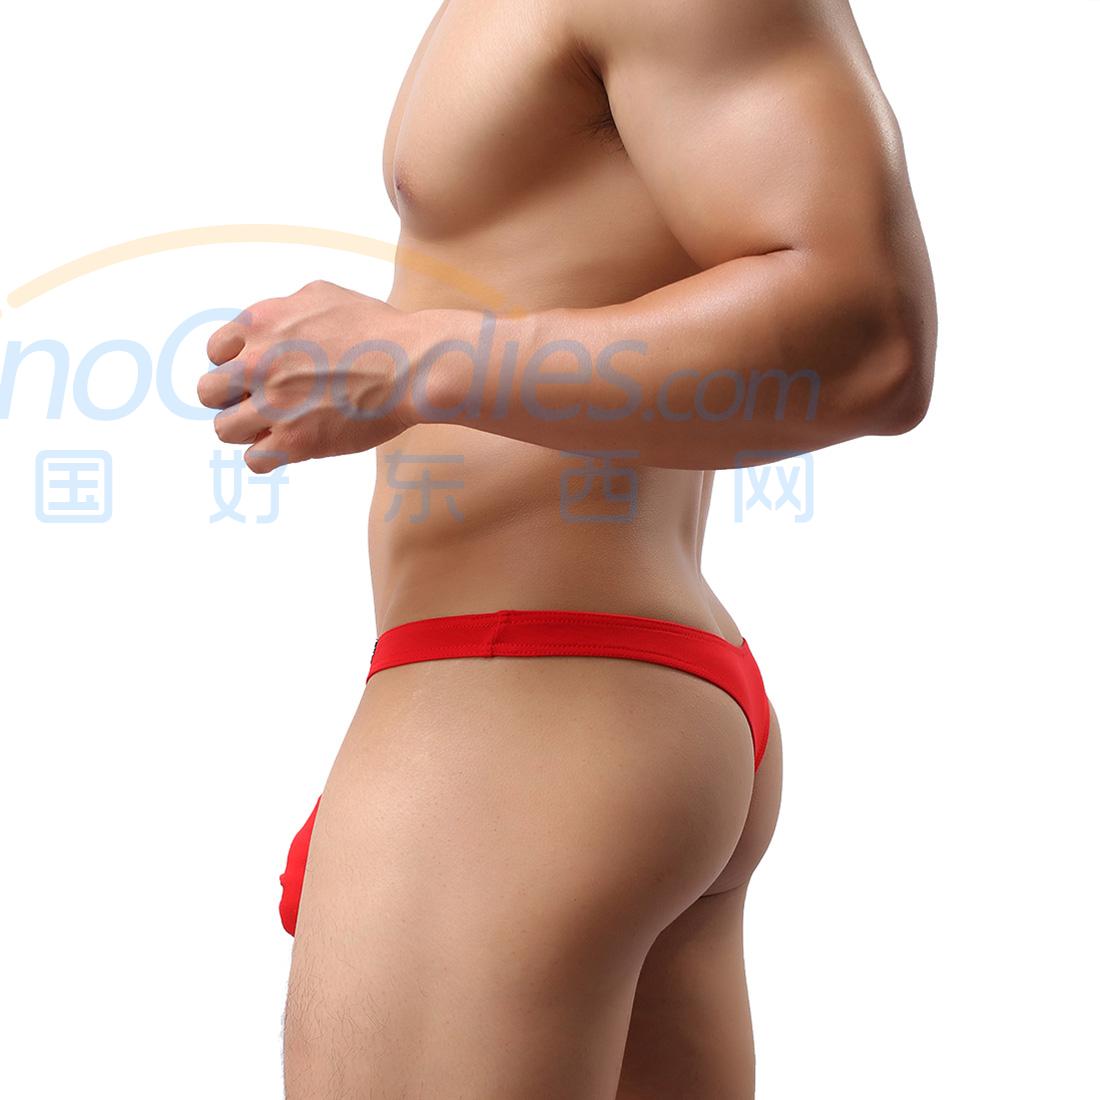 Men's Sexy Lingerie Underwear Modal Triangle Pants Shorts with Penis Sheath JET Bikini WH9 Red XL